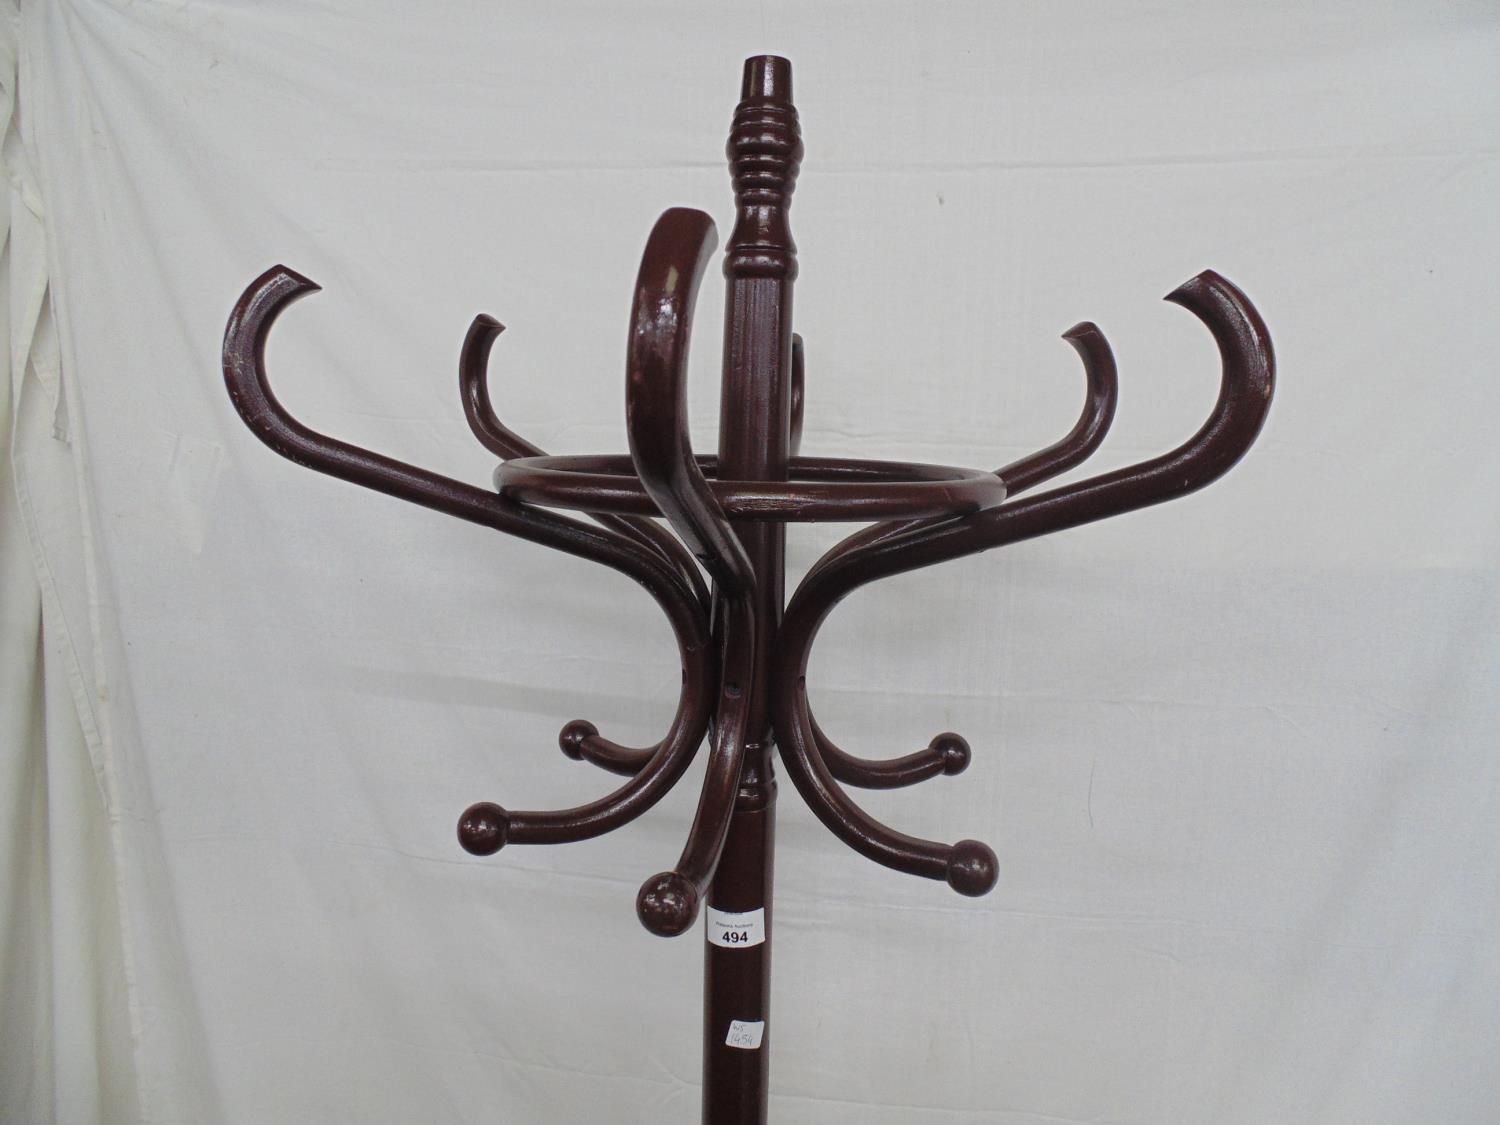 Modern painted bentwood hatstand having six S shaped coat hooks and lower umbrella section - - Image 3 of 3